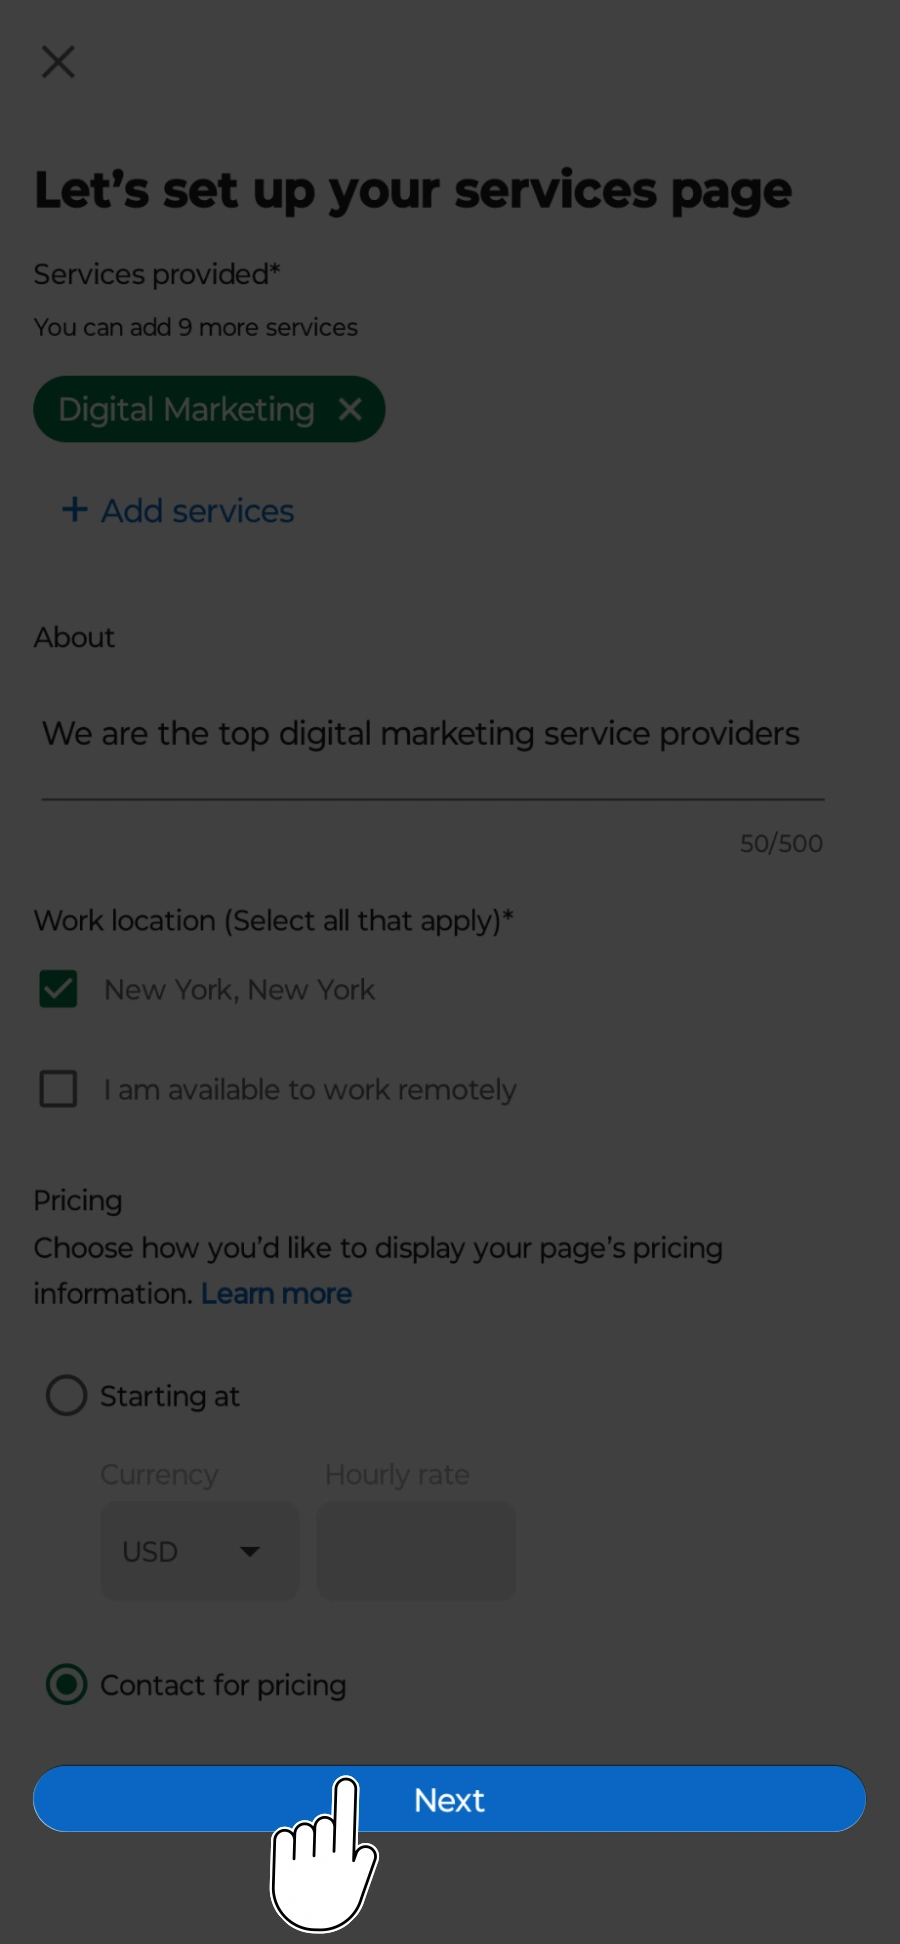 Next Button in LinkedIn While Creating a LinkedIn Service Page on Android Phone